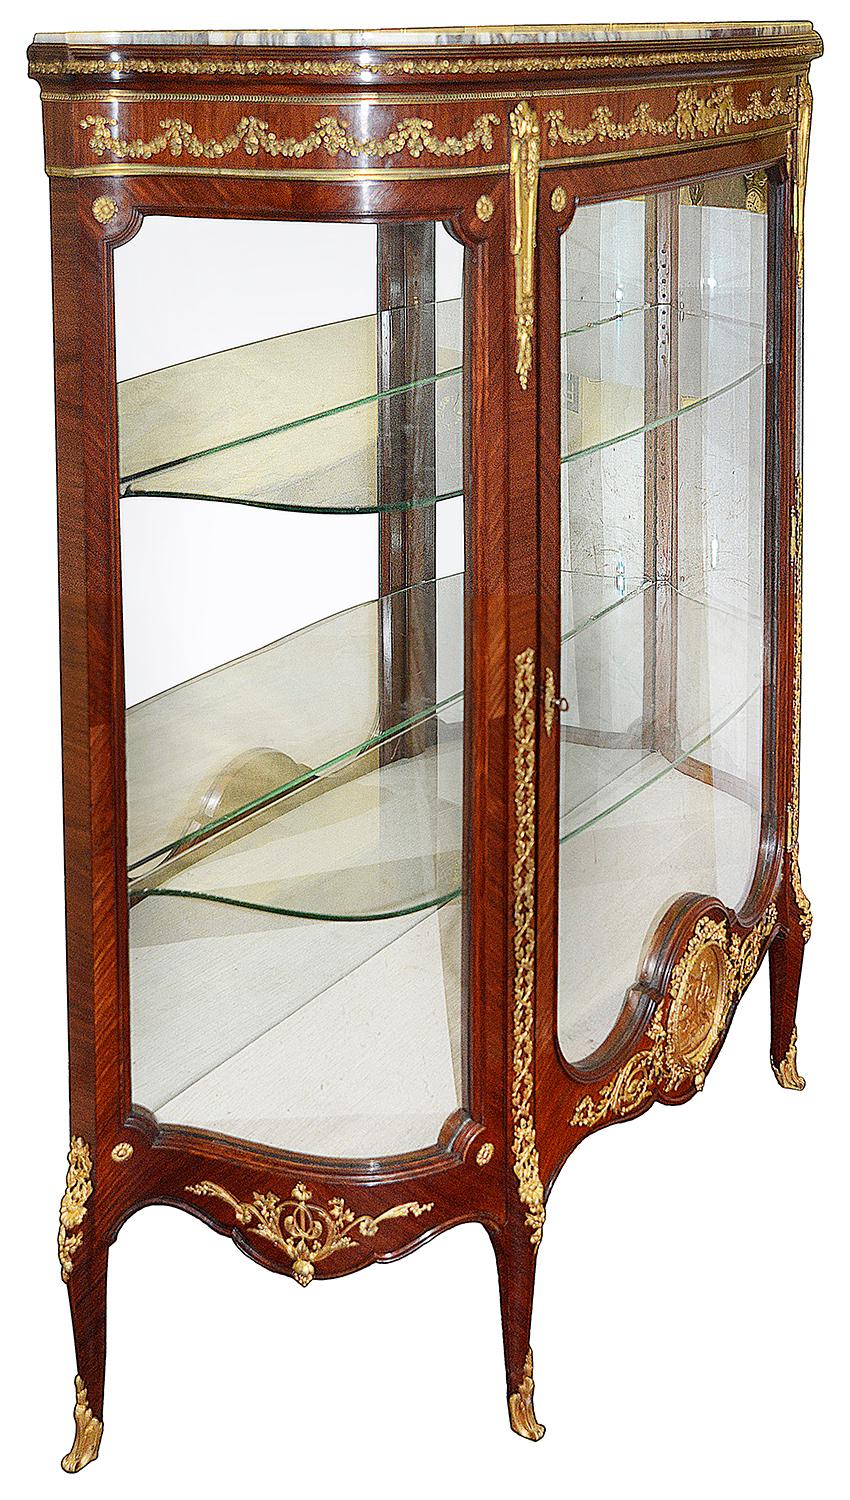 A fine quality late 19th century French Louis XVI style mahogany vitrine, having wonderfully fine quality gilded ormolu mounts. Having its original marble top, the single glazed door opening to reveal adjustable glass shelves within. A classical